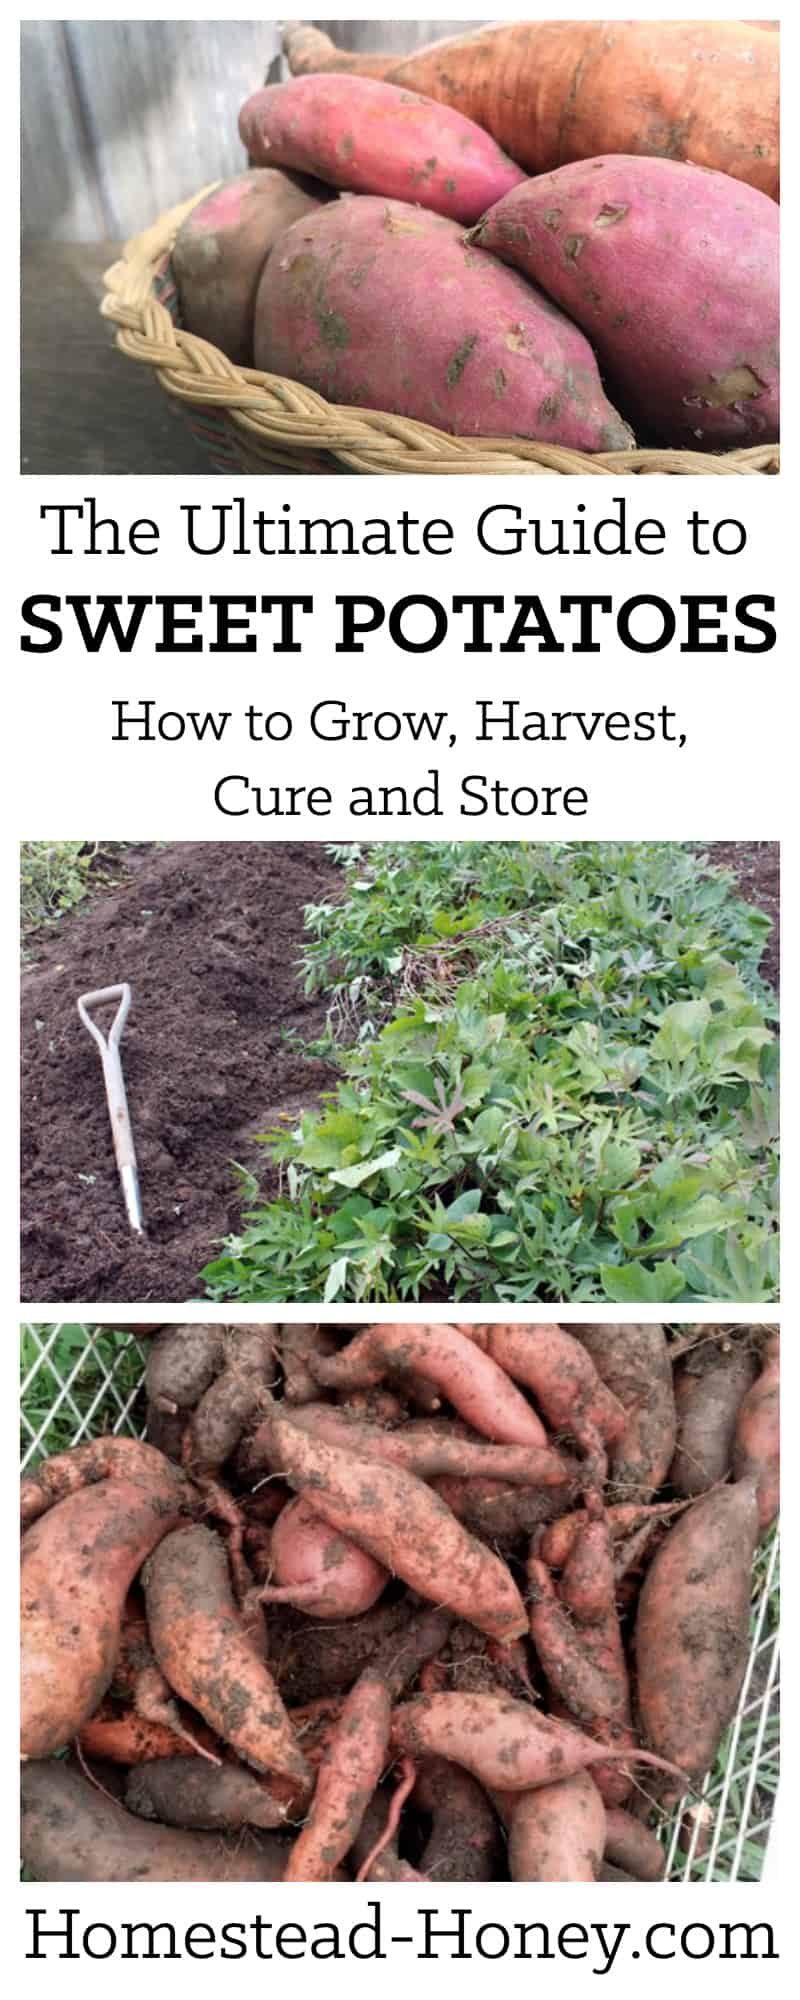 How To Grow, Harvest, Cure & Store Sweet Potatoes | Sweet Potatoes are easy to grow in your garden and are a wonderful storage crop. Not to mention that homegrown sweet potatoes are out-of-this-world delicious! This guide will show you how to grow, harvest, cure, & store sweet potatoes for winter eating! | Homestead Honey #gardening, #homesteading